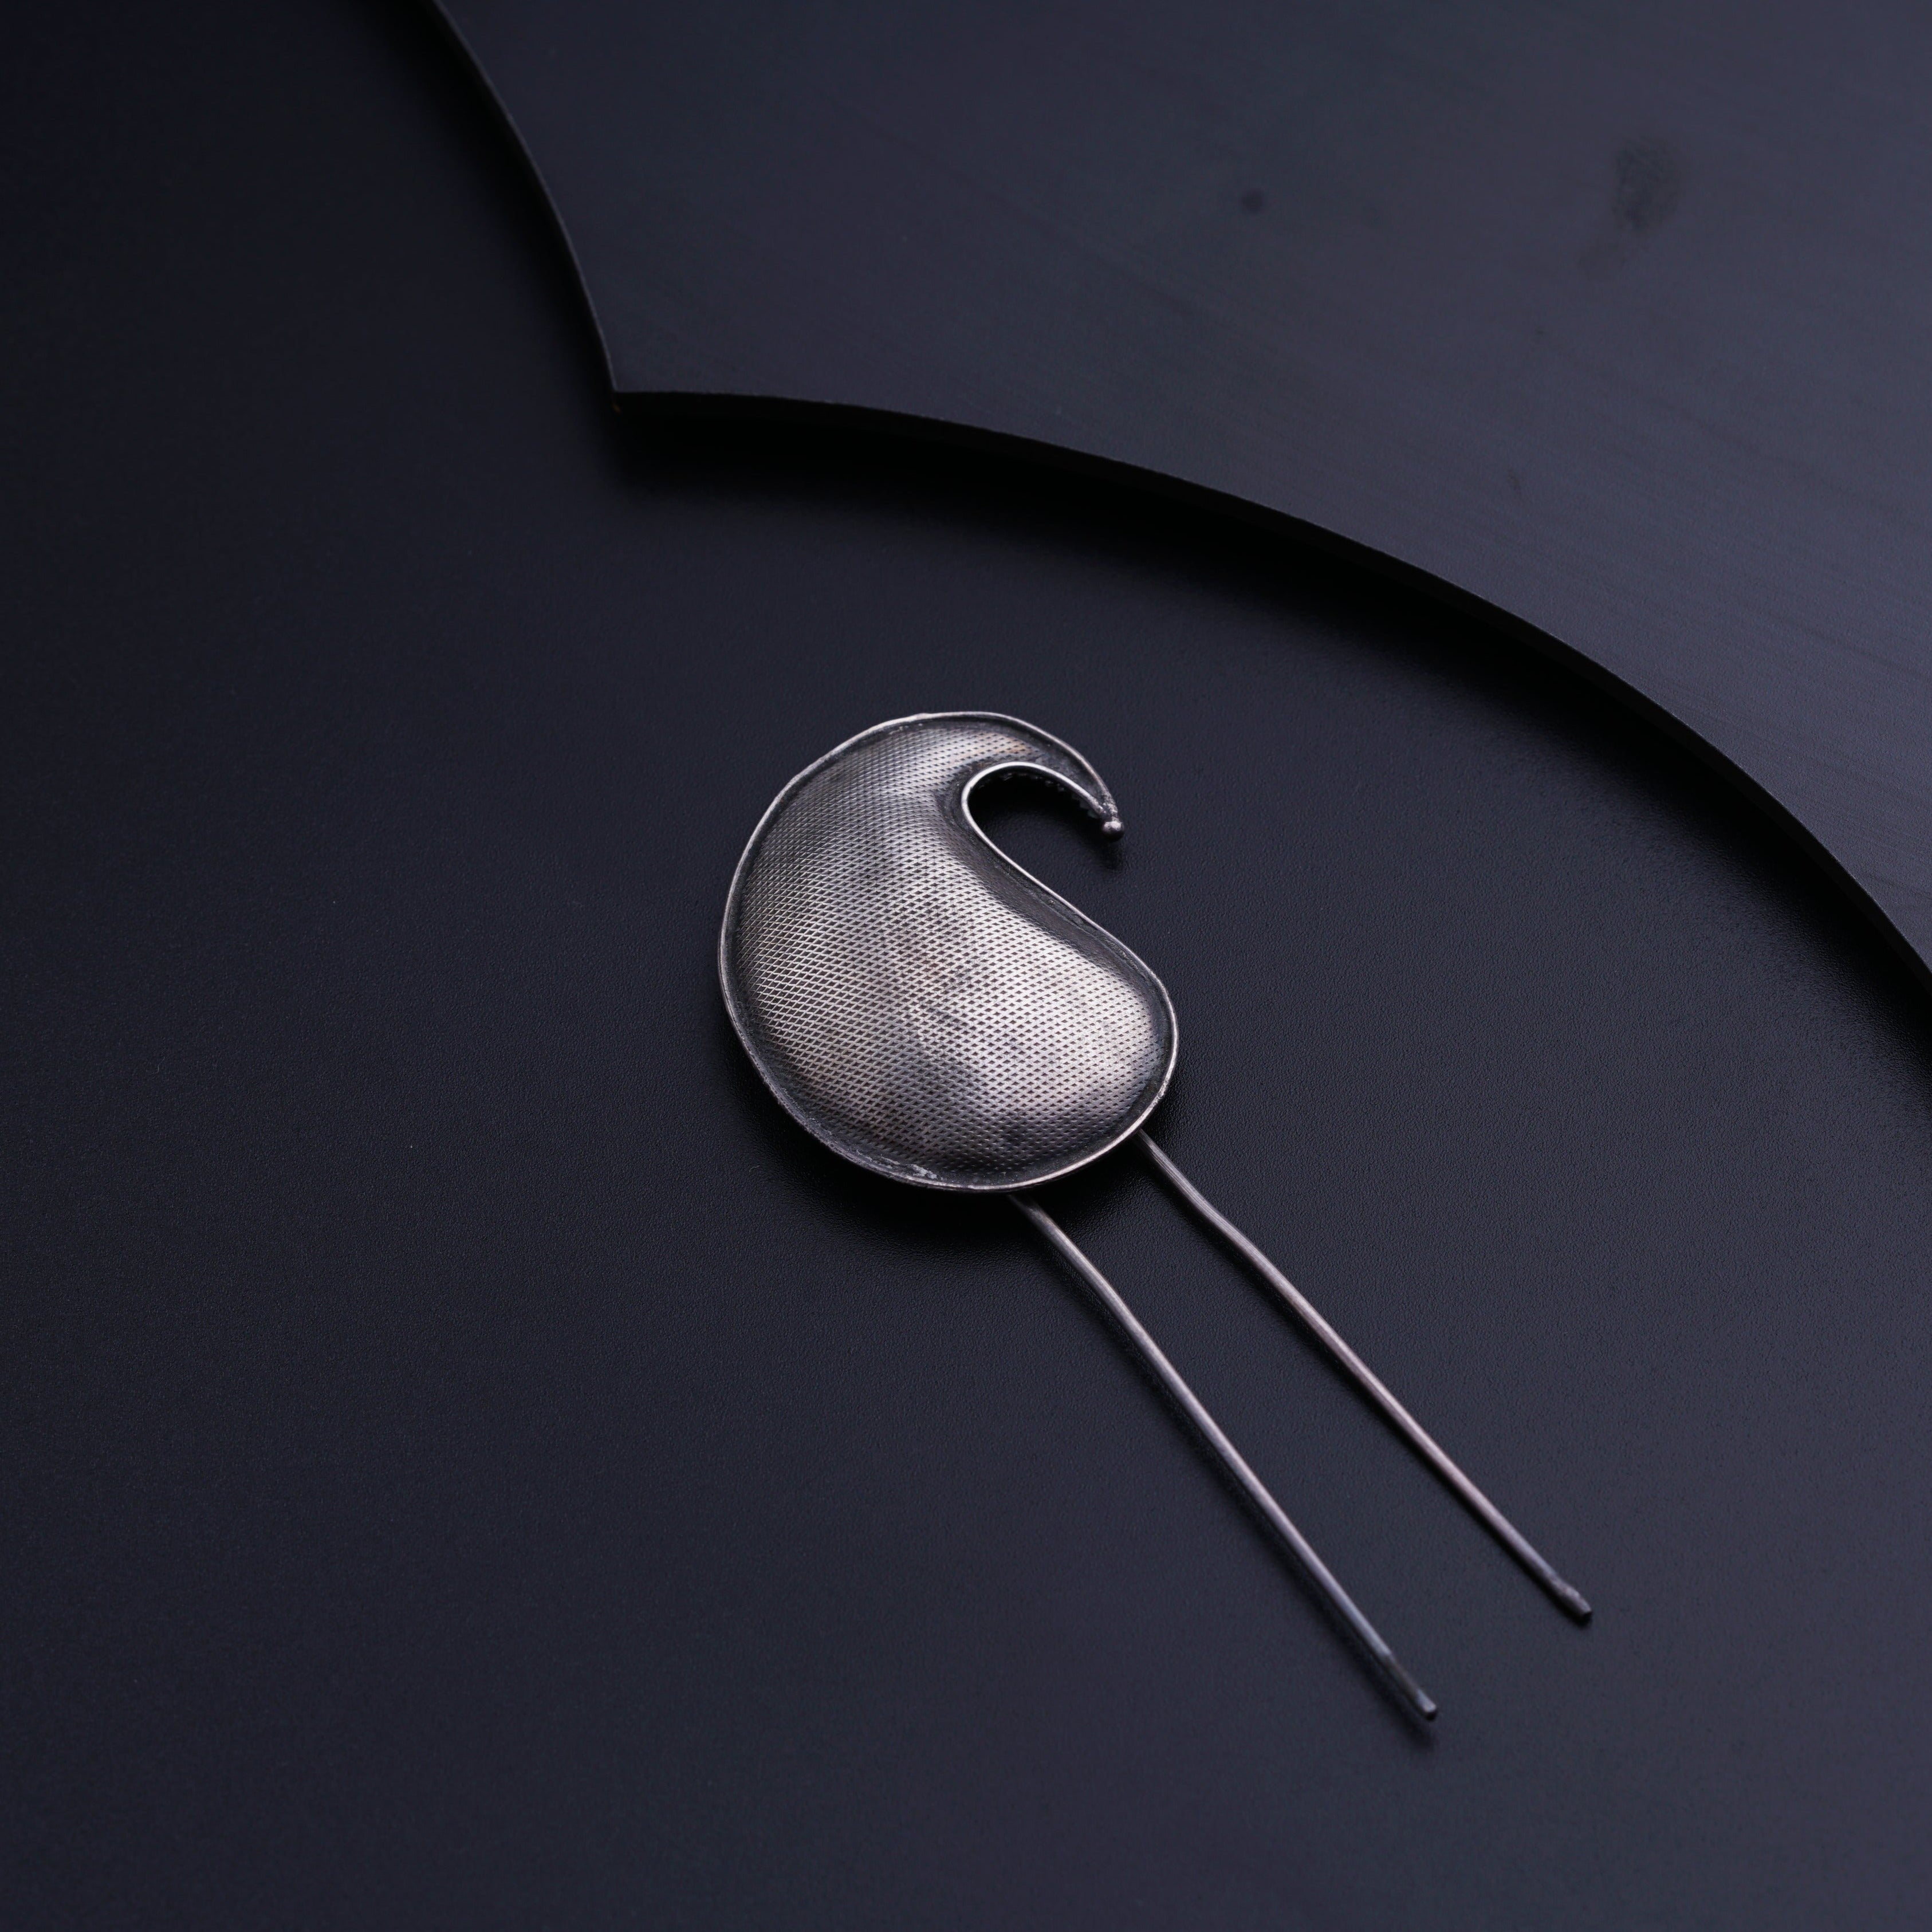 a spoon with a metal handle on a black surface